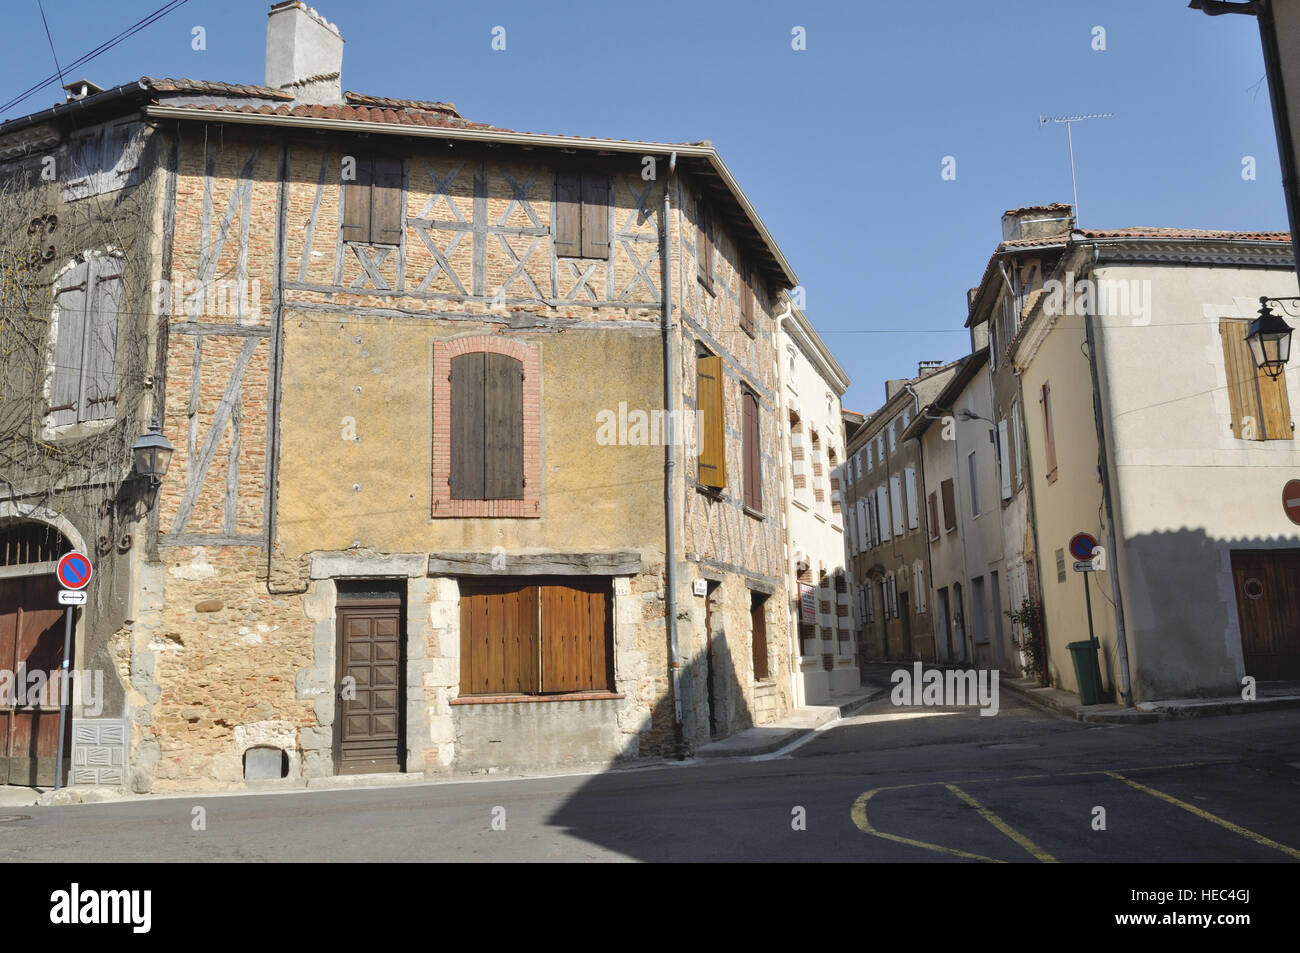 Typical French architecture at the junction of Rue Bistouquet and Rue du Pourtiq in Eauze, France. Stock Photo